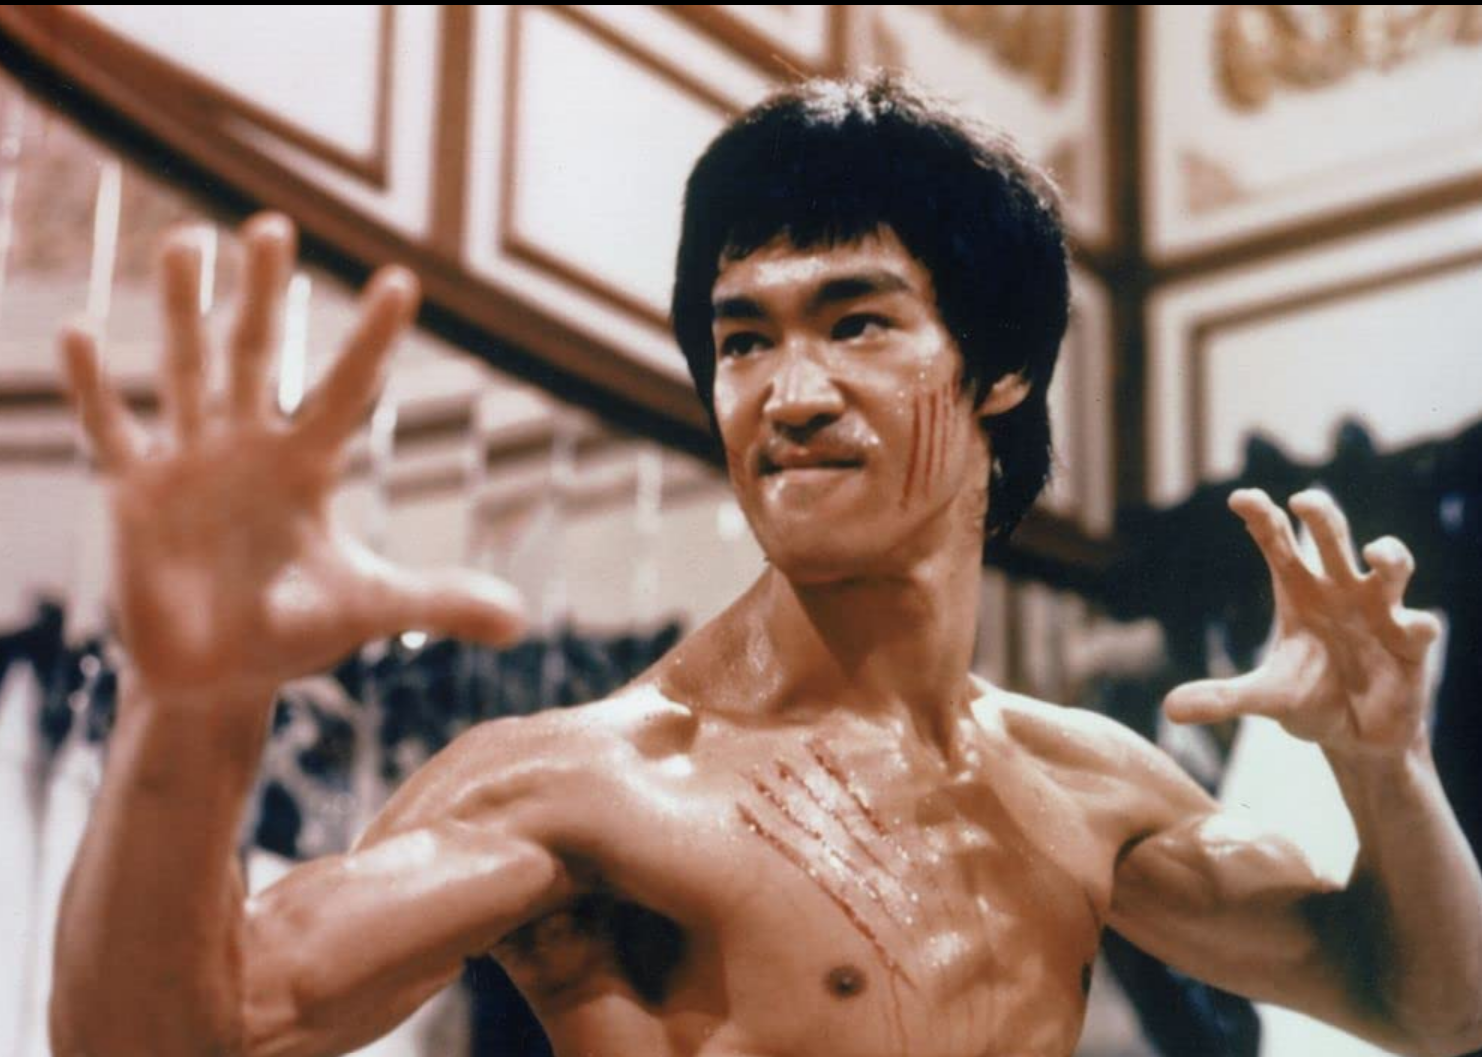 Bruce Lee in a scene from "Enter the Dragon".